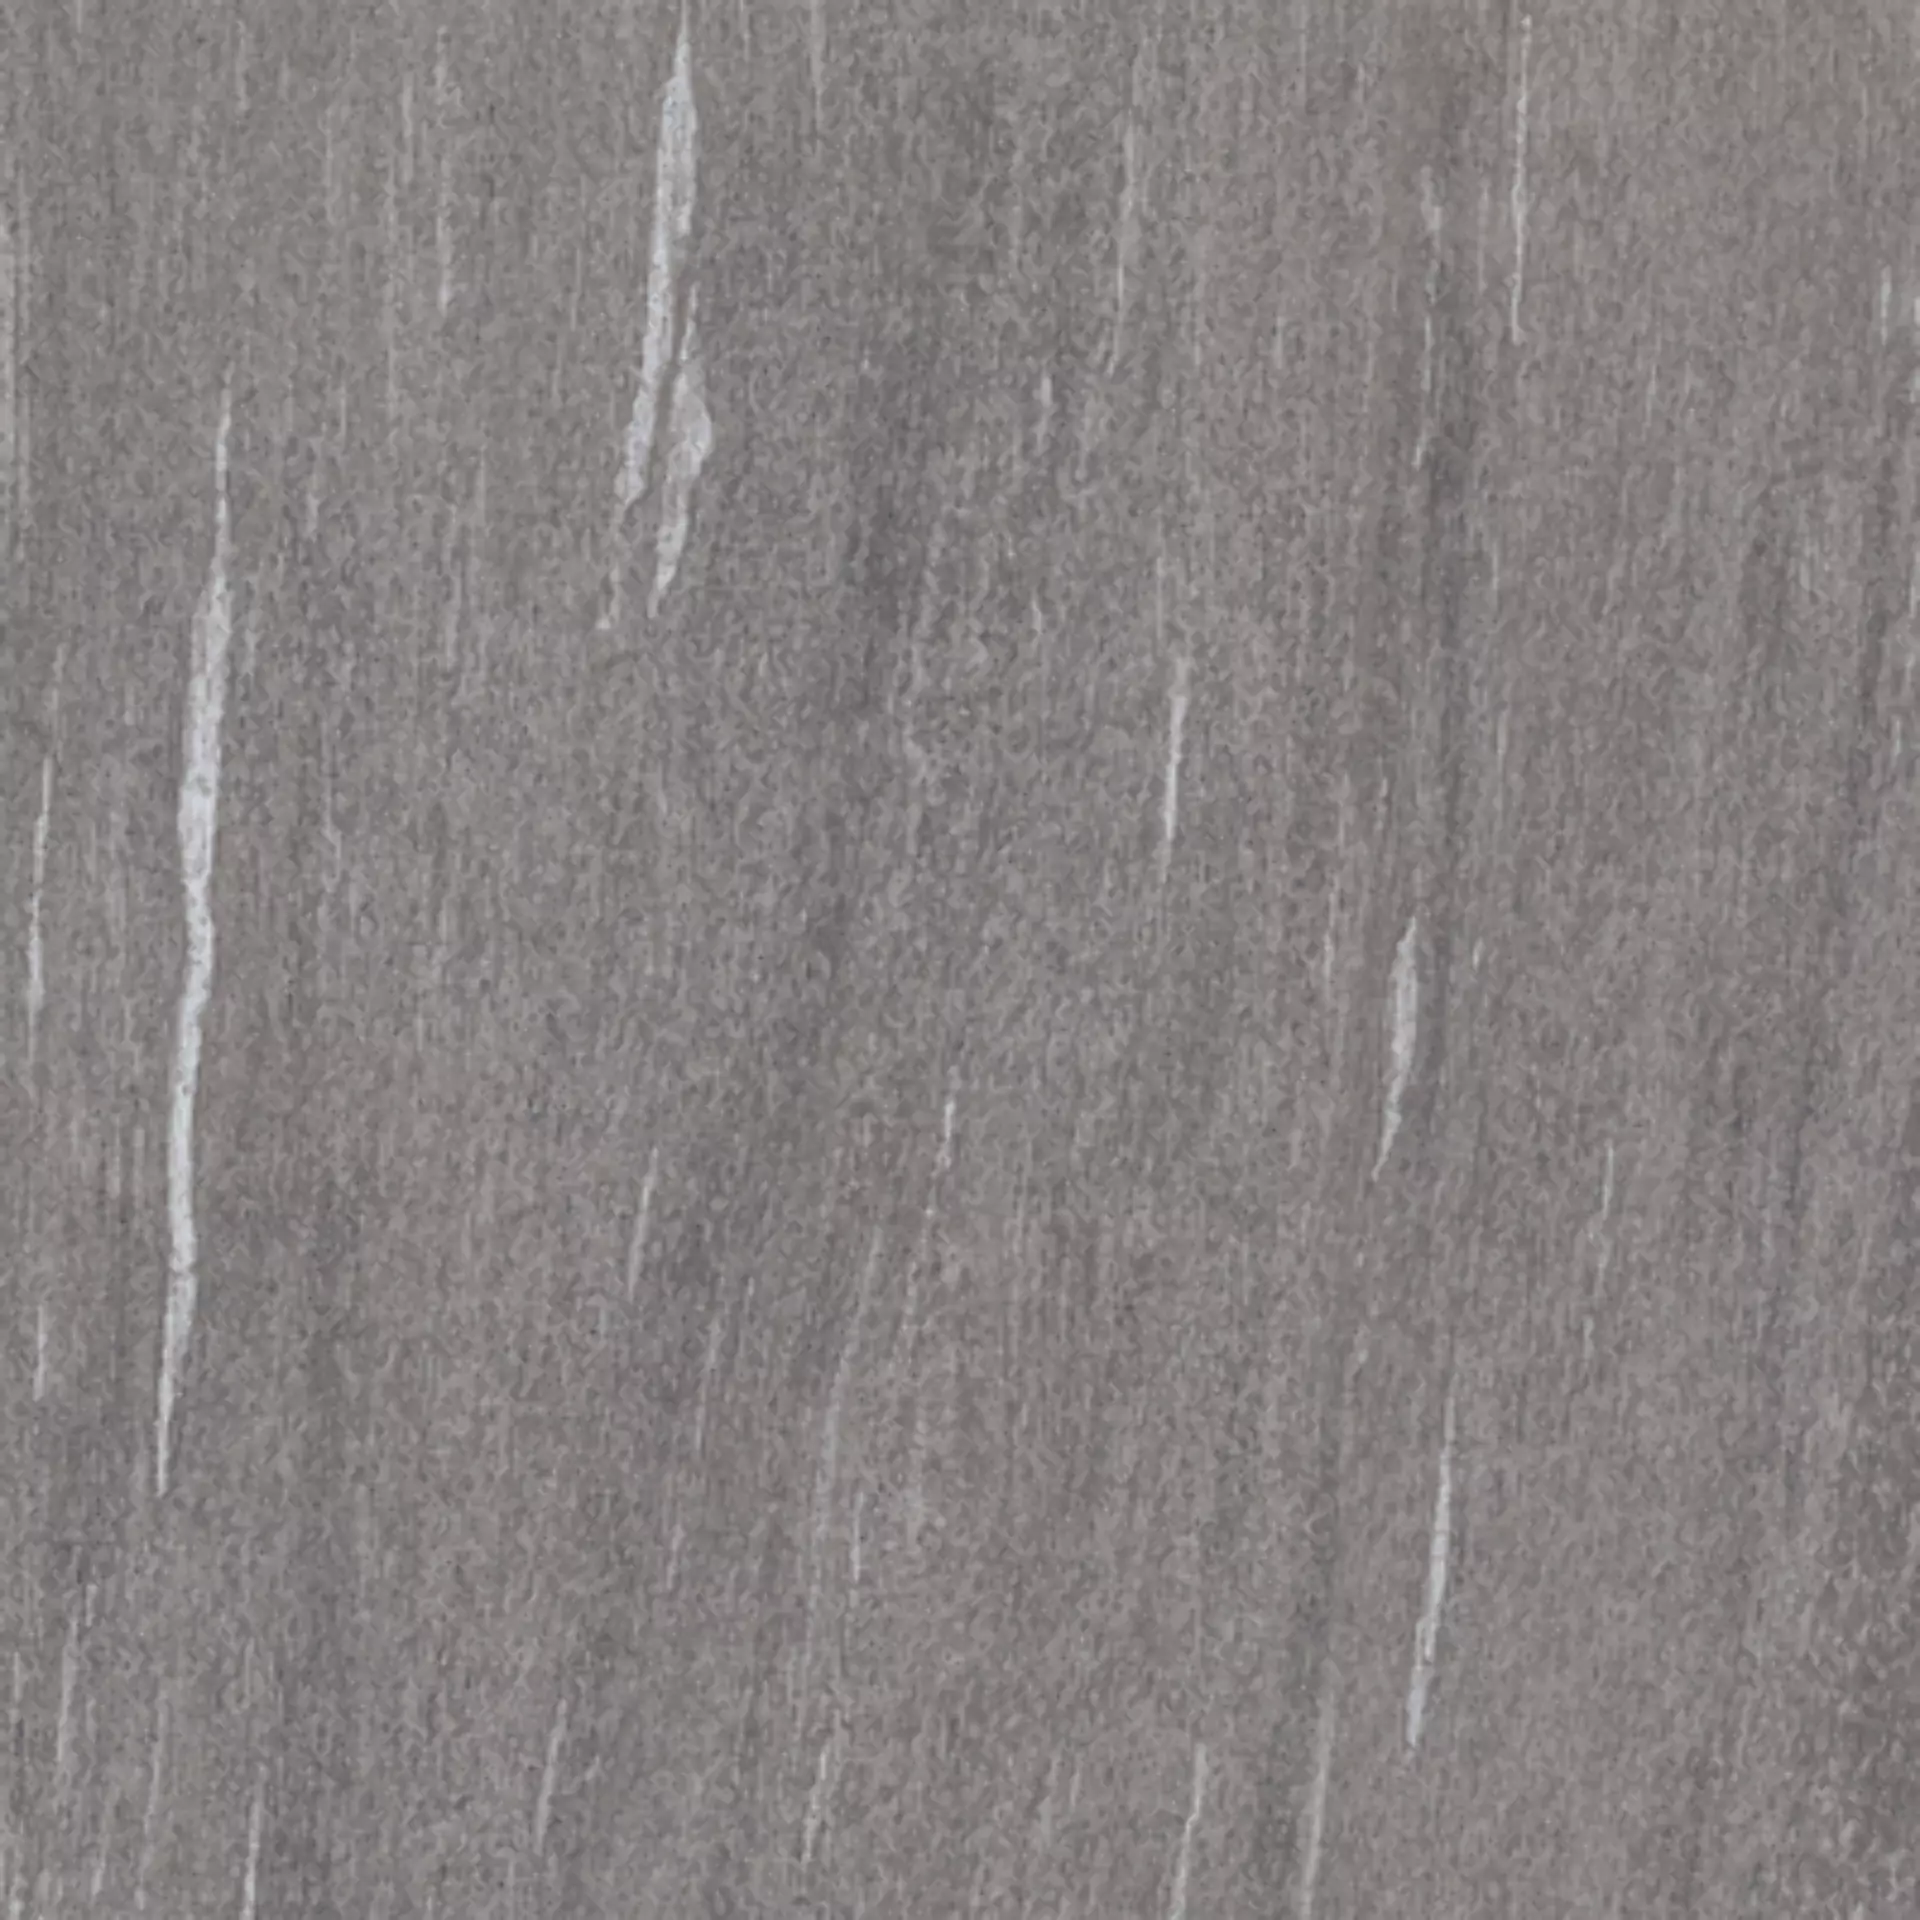 Keope Swisstone Anthracite Strutturato 46423148 60x60cm rectified 8,5mm